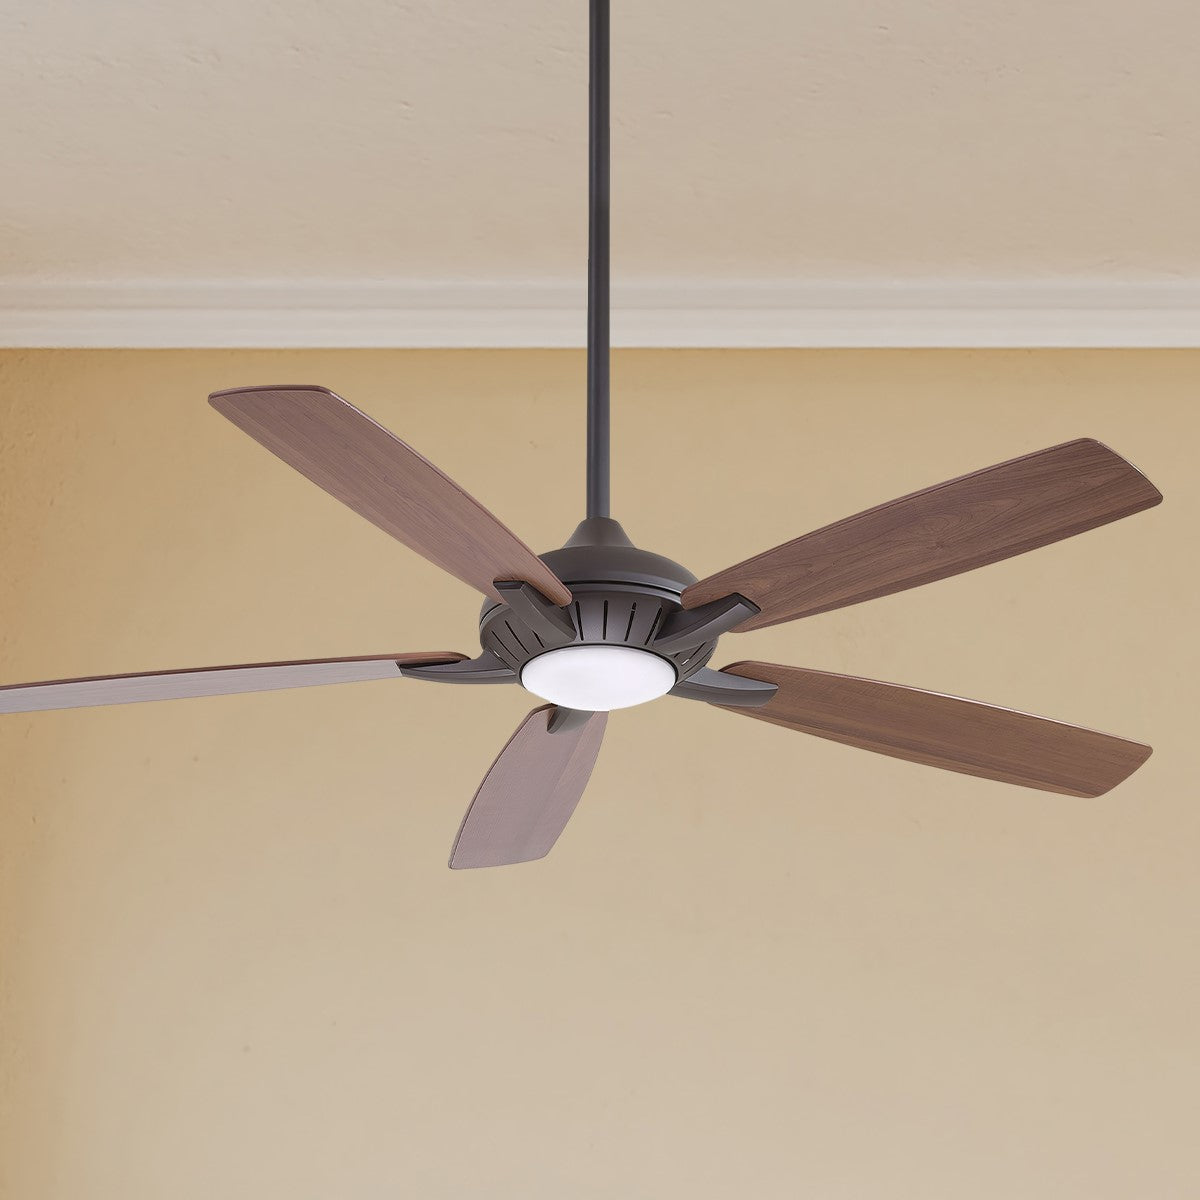 Dyno XL 60 Inch Smart Ceiling Fan With Light And Remote